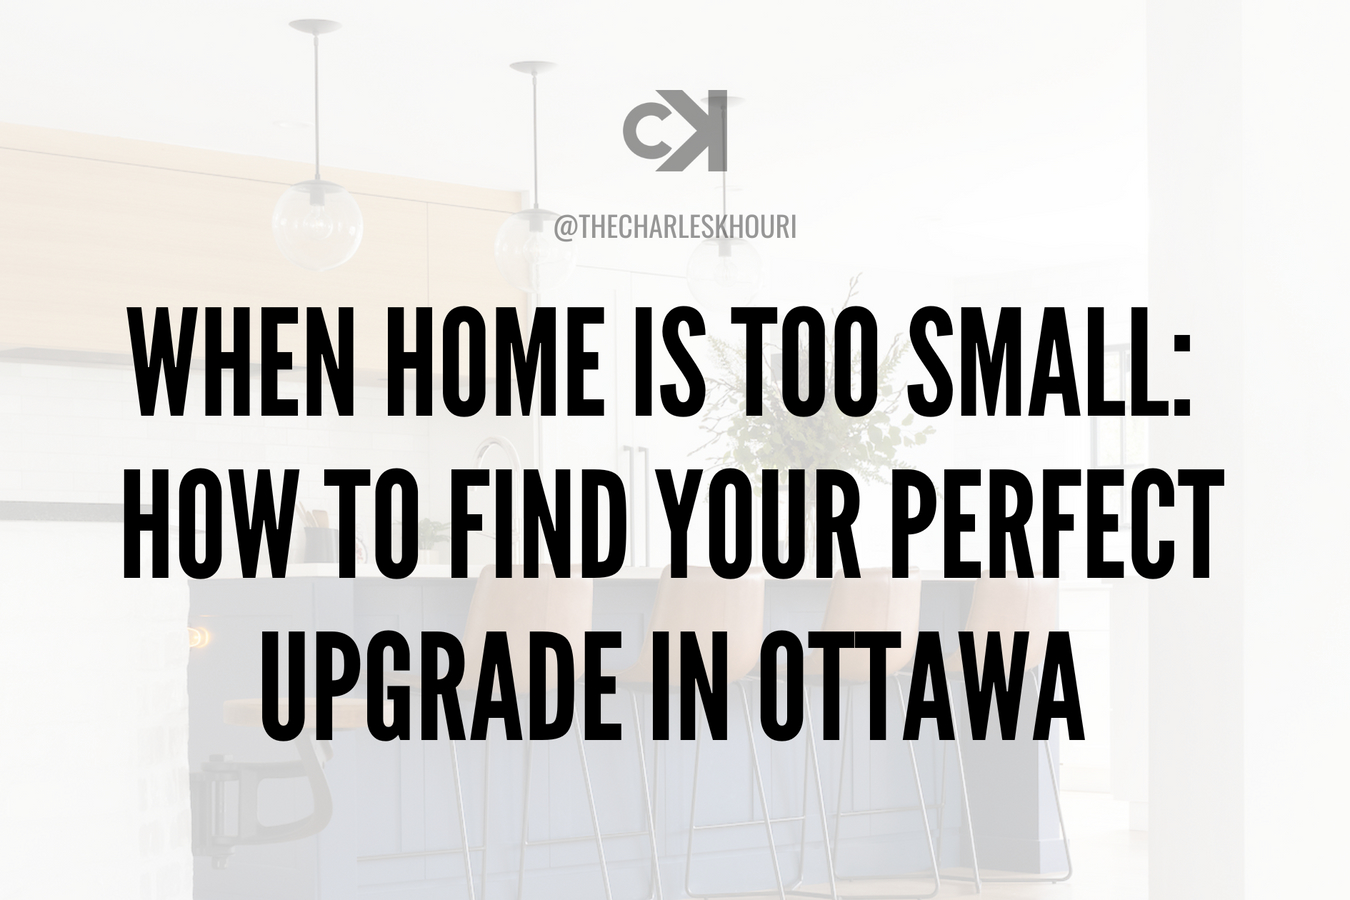 WHEN HOME IS TOO SMALL: HOW TO FIND YOUR PERFECT UPGRADE IN OTTAWA